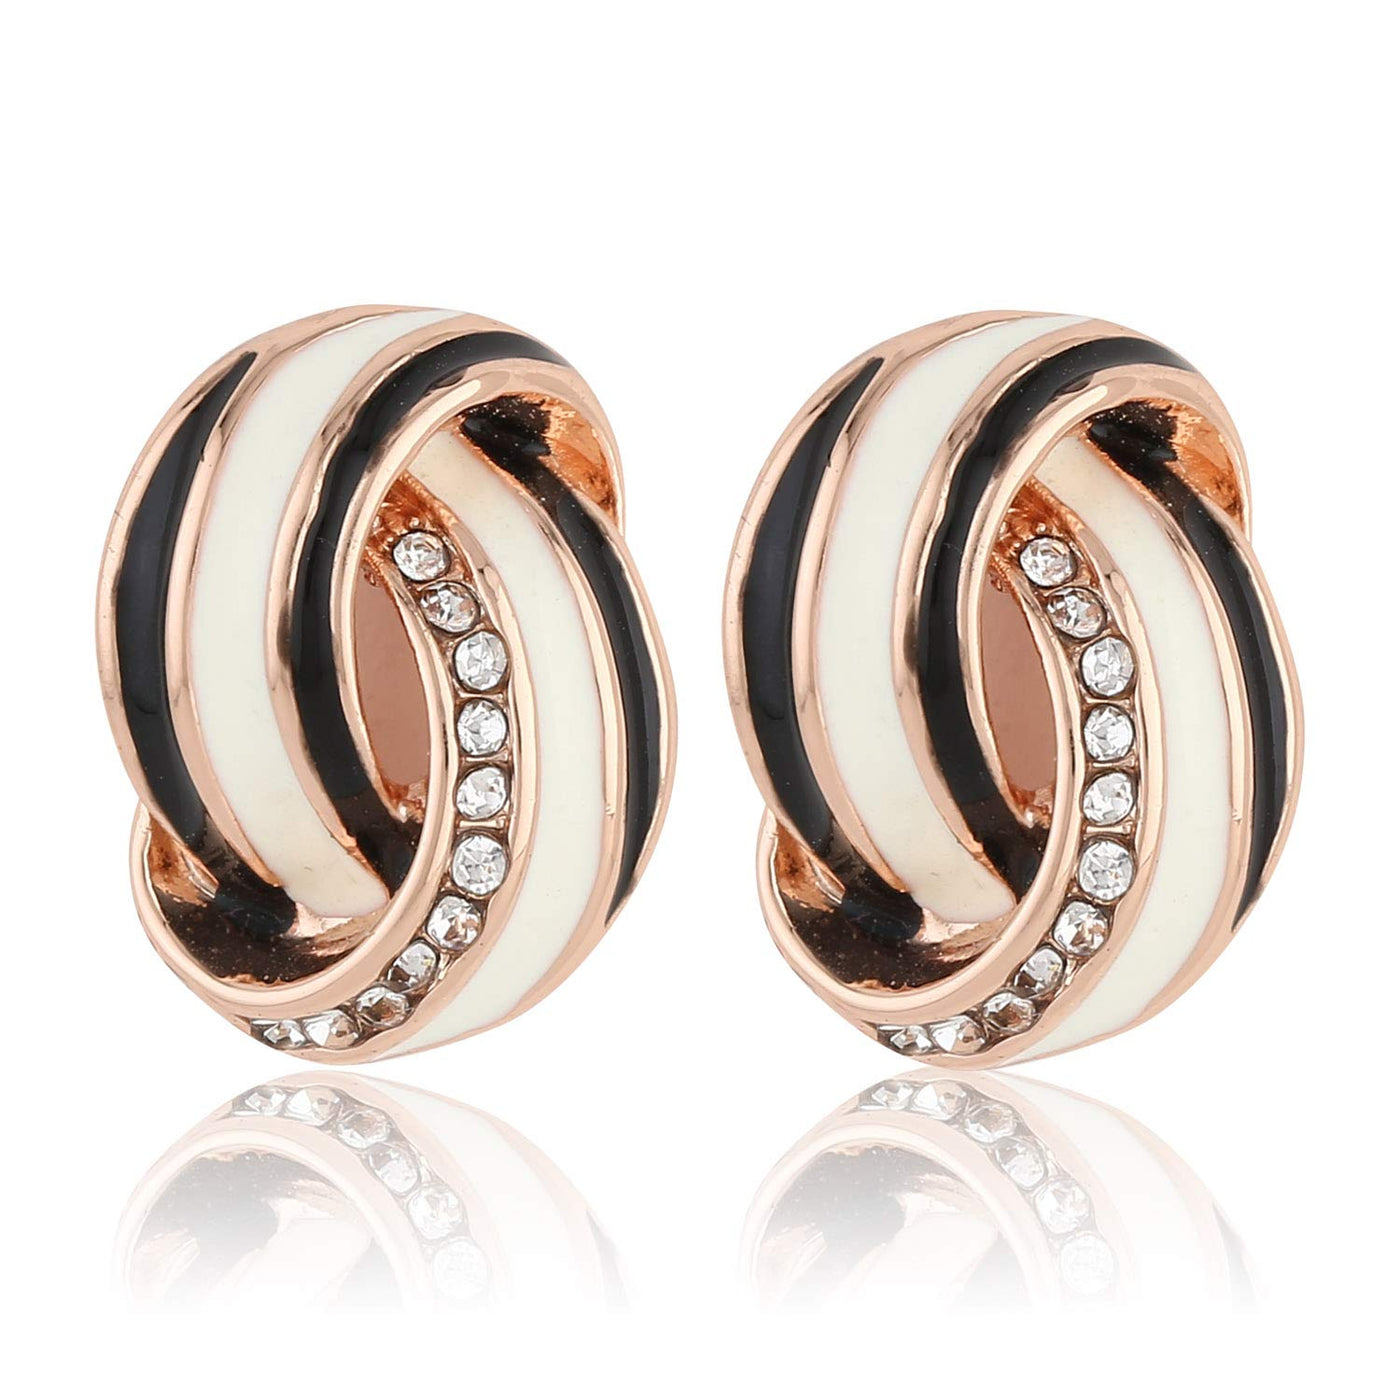 Estele Earrings Jewellery Gifts For Valentines Day (VOILET & WHITE)